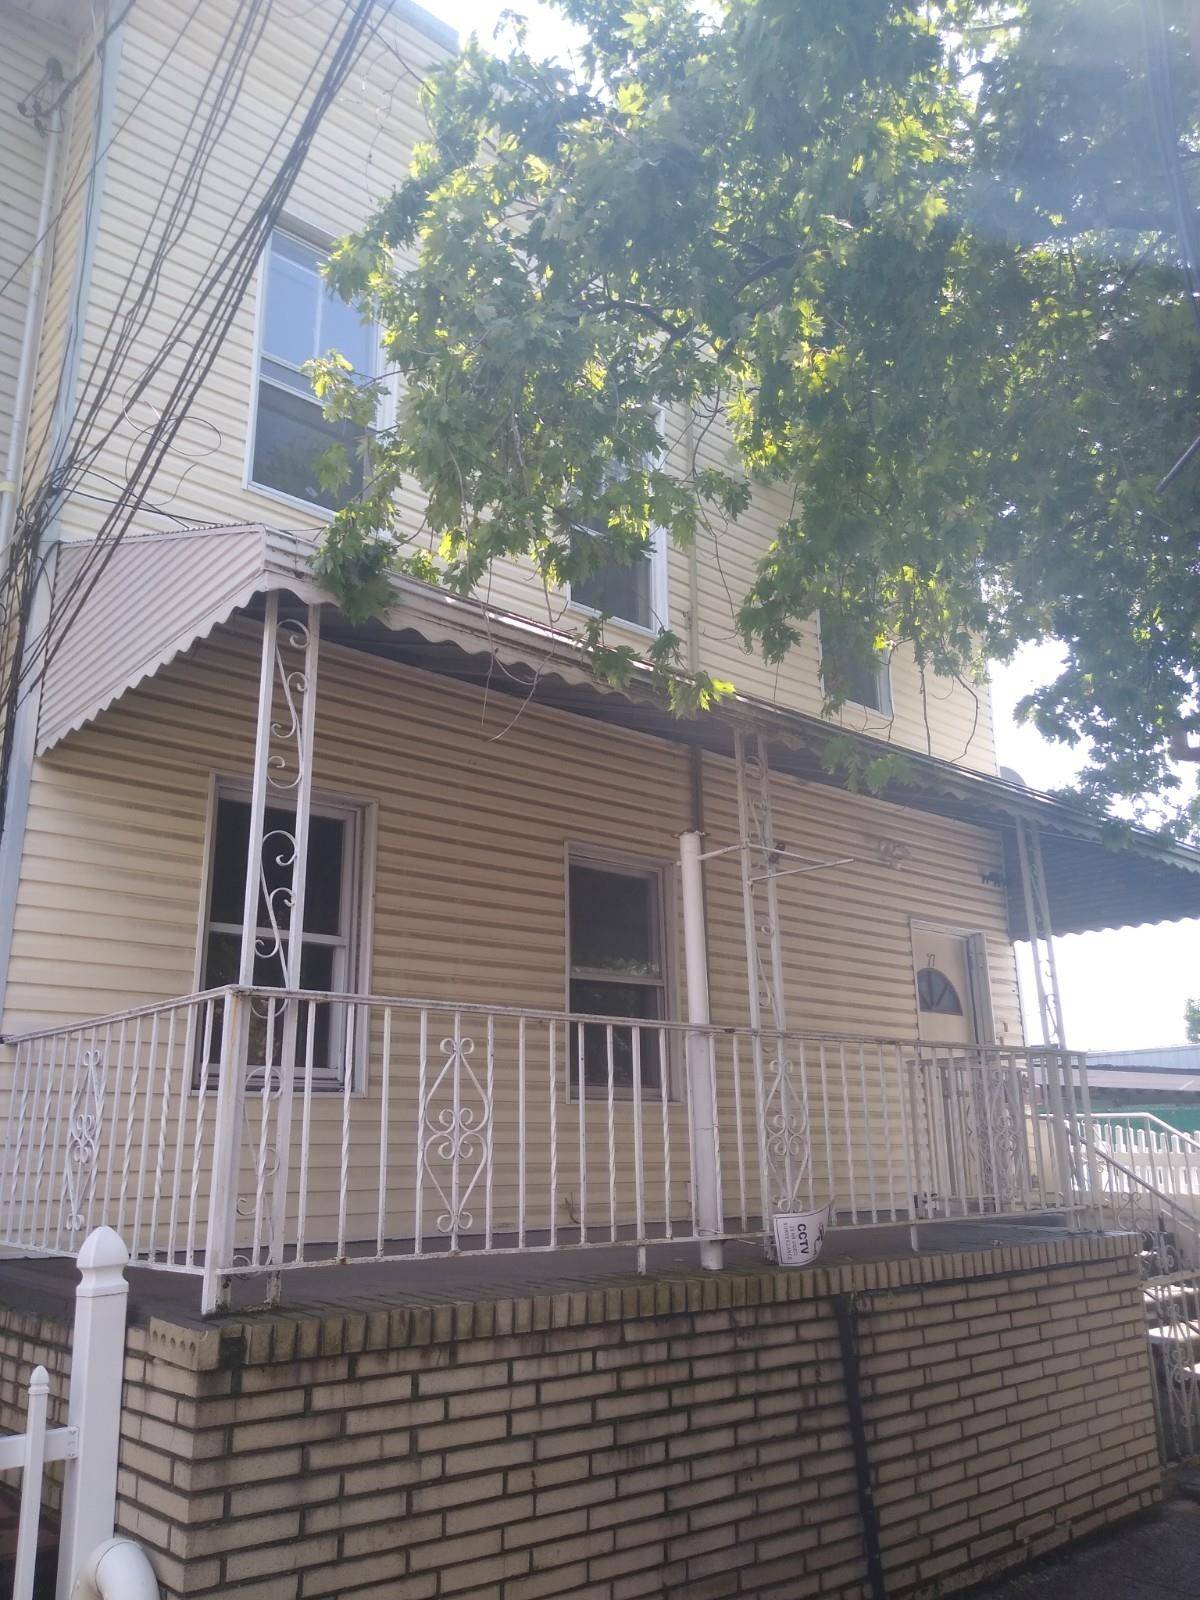 17 CRAWFORD ST Multi-Family New Jersey